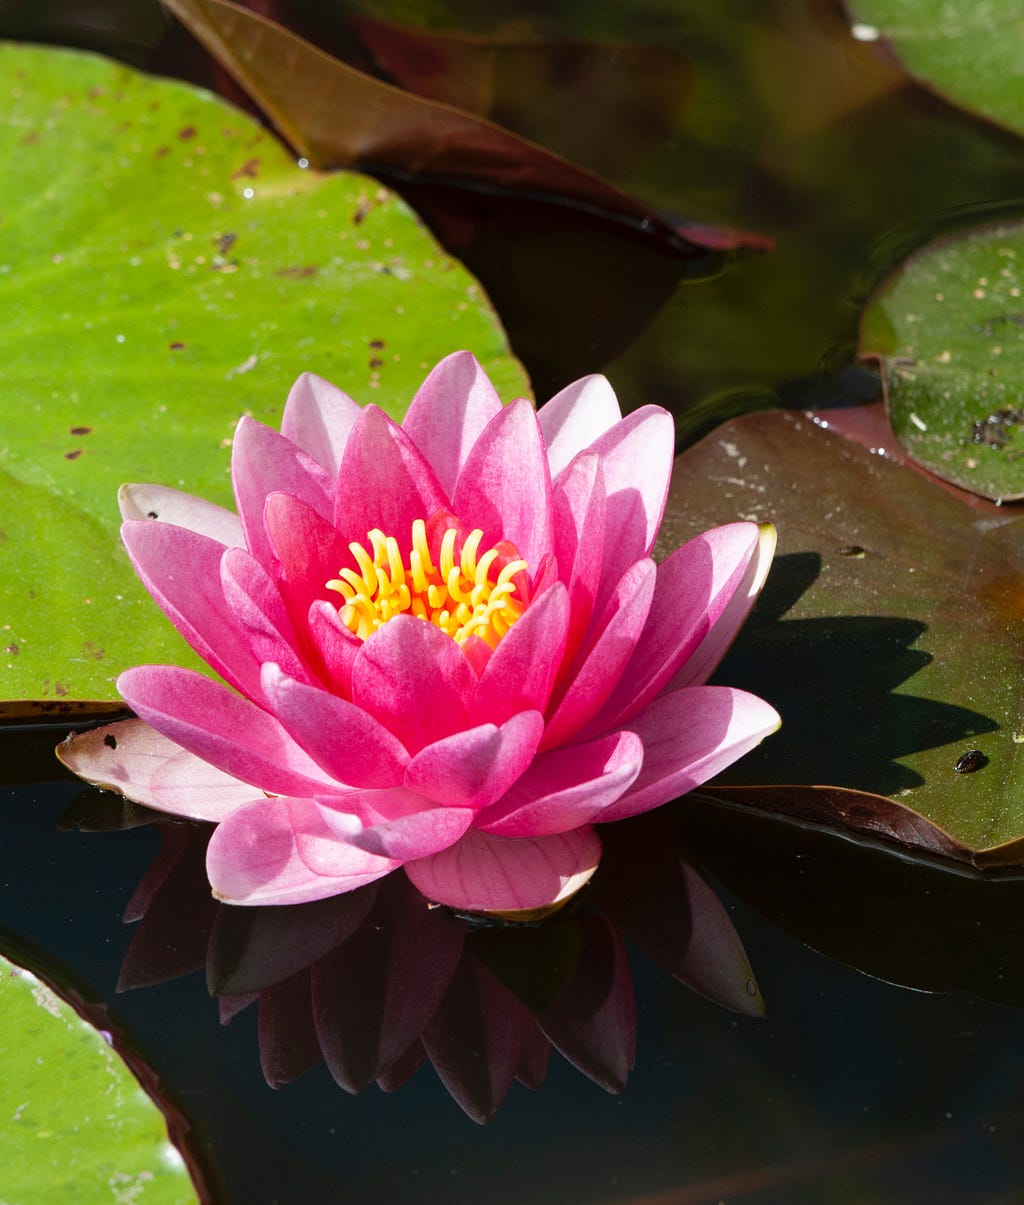 This is a lotus flower. We can see it is pink in colour. It is present in water but is untouched by the muddy impure water. It represents the life of a person who is present in the material world but away from the material world.